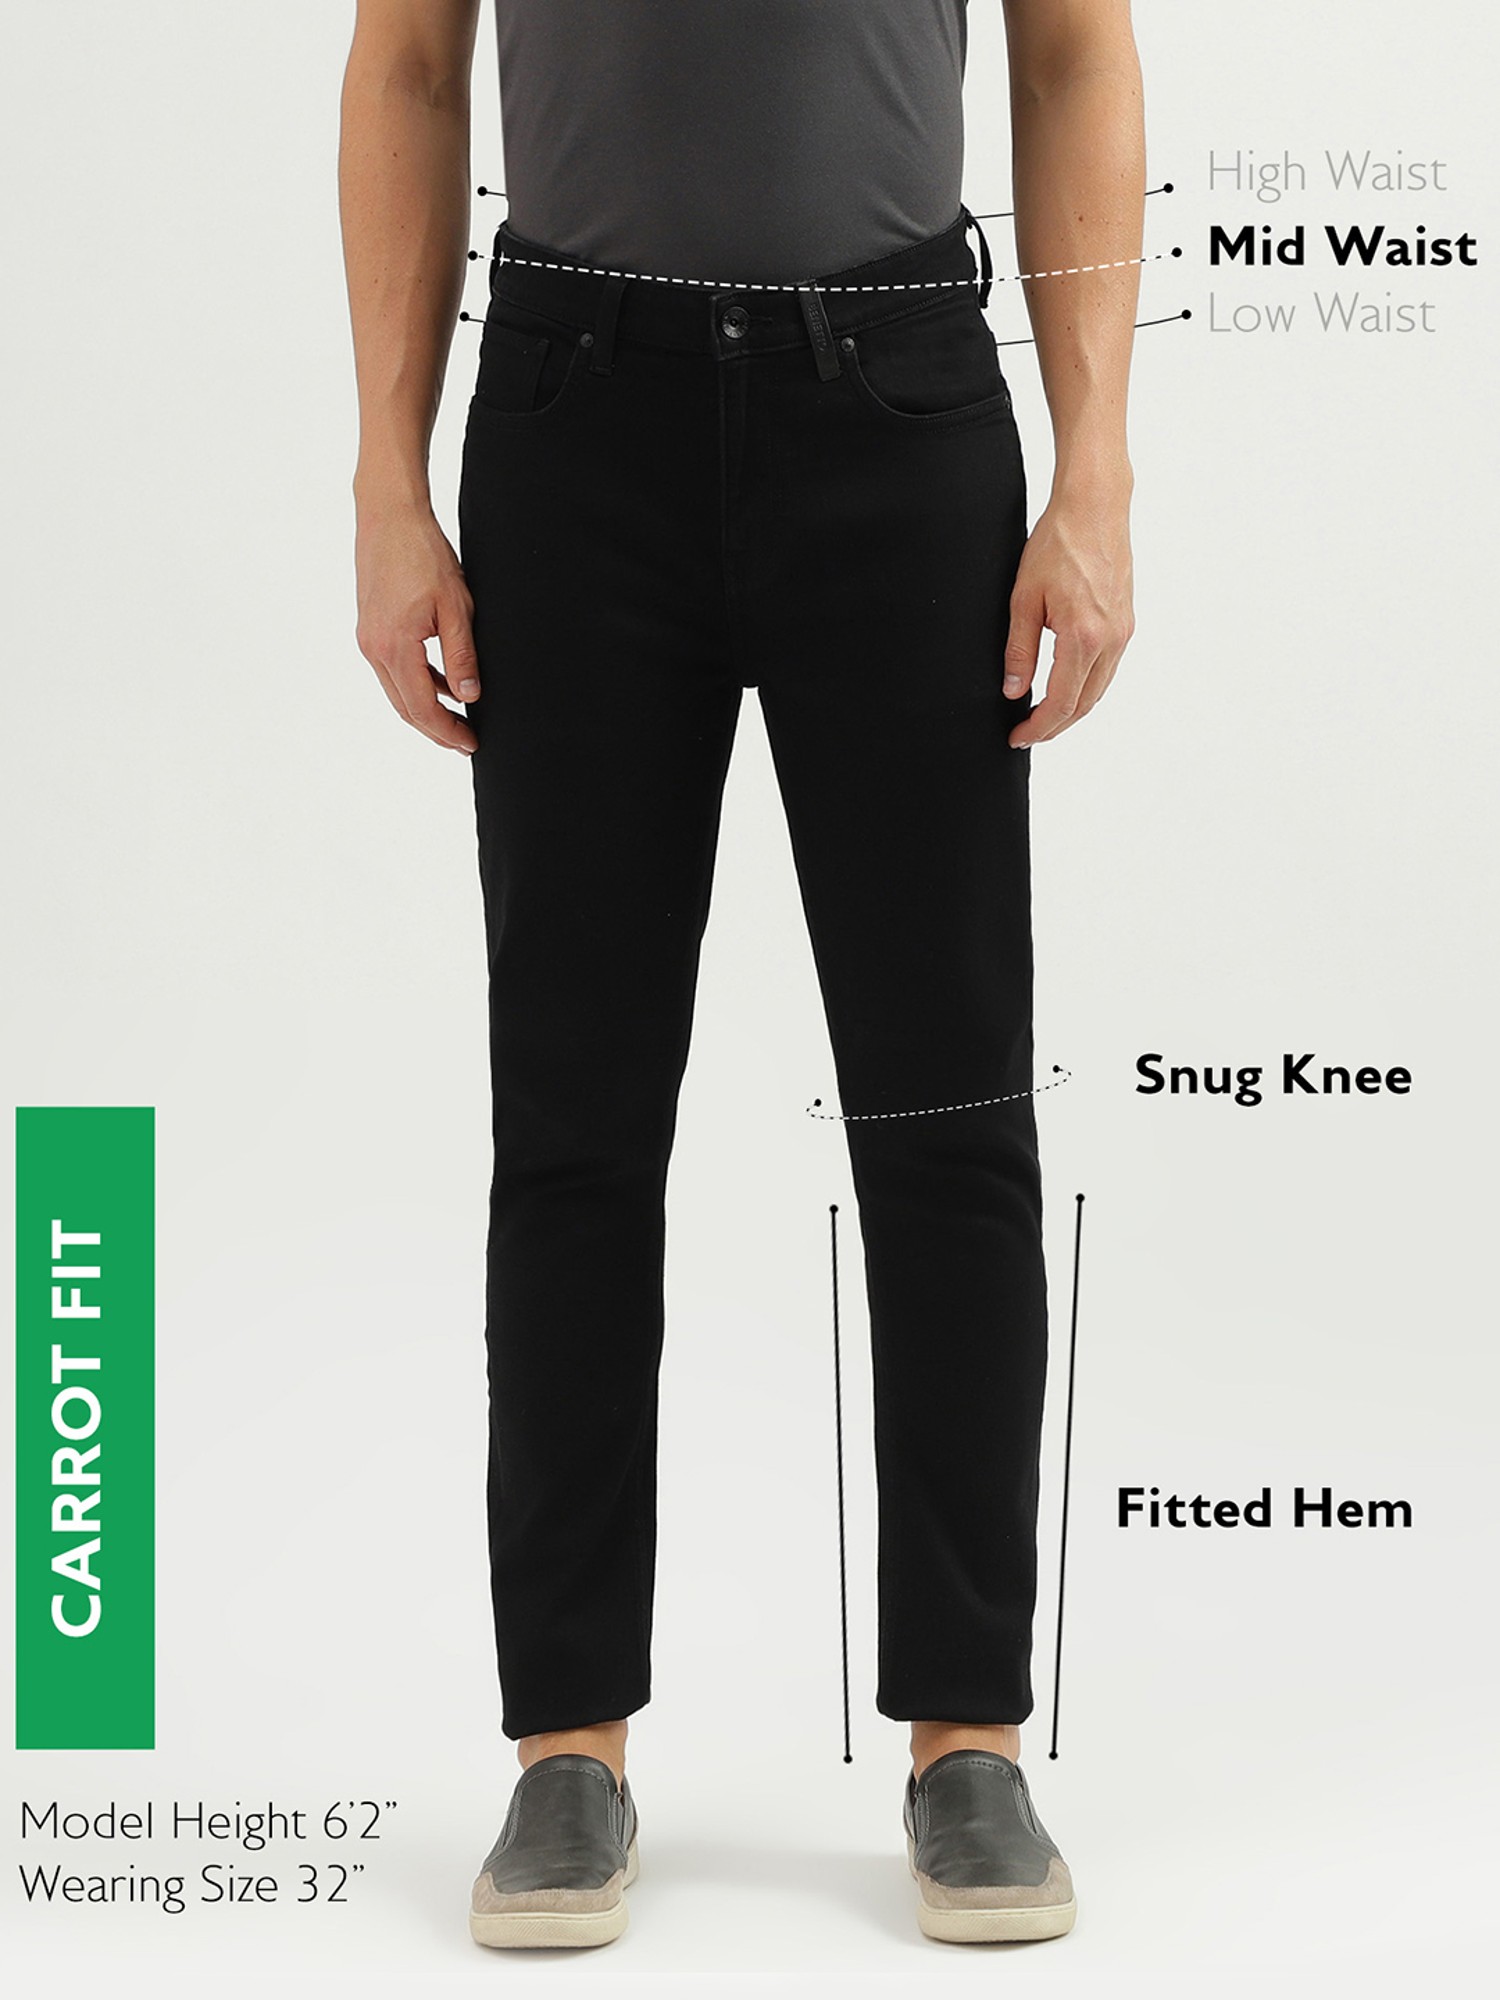 Share more than 230 carrot fit jeans mens super hot